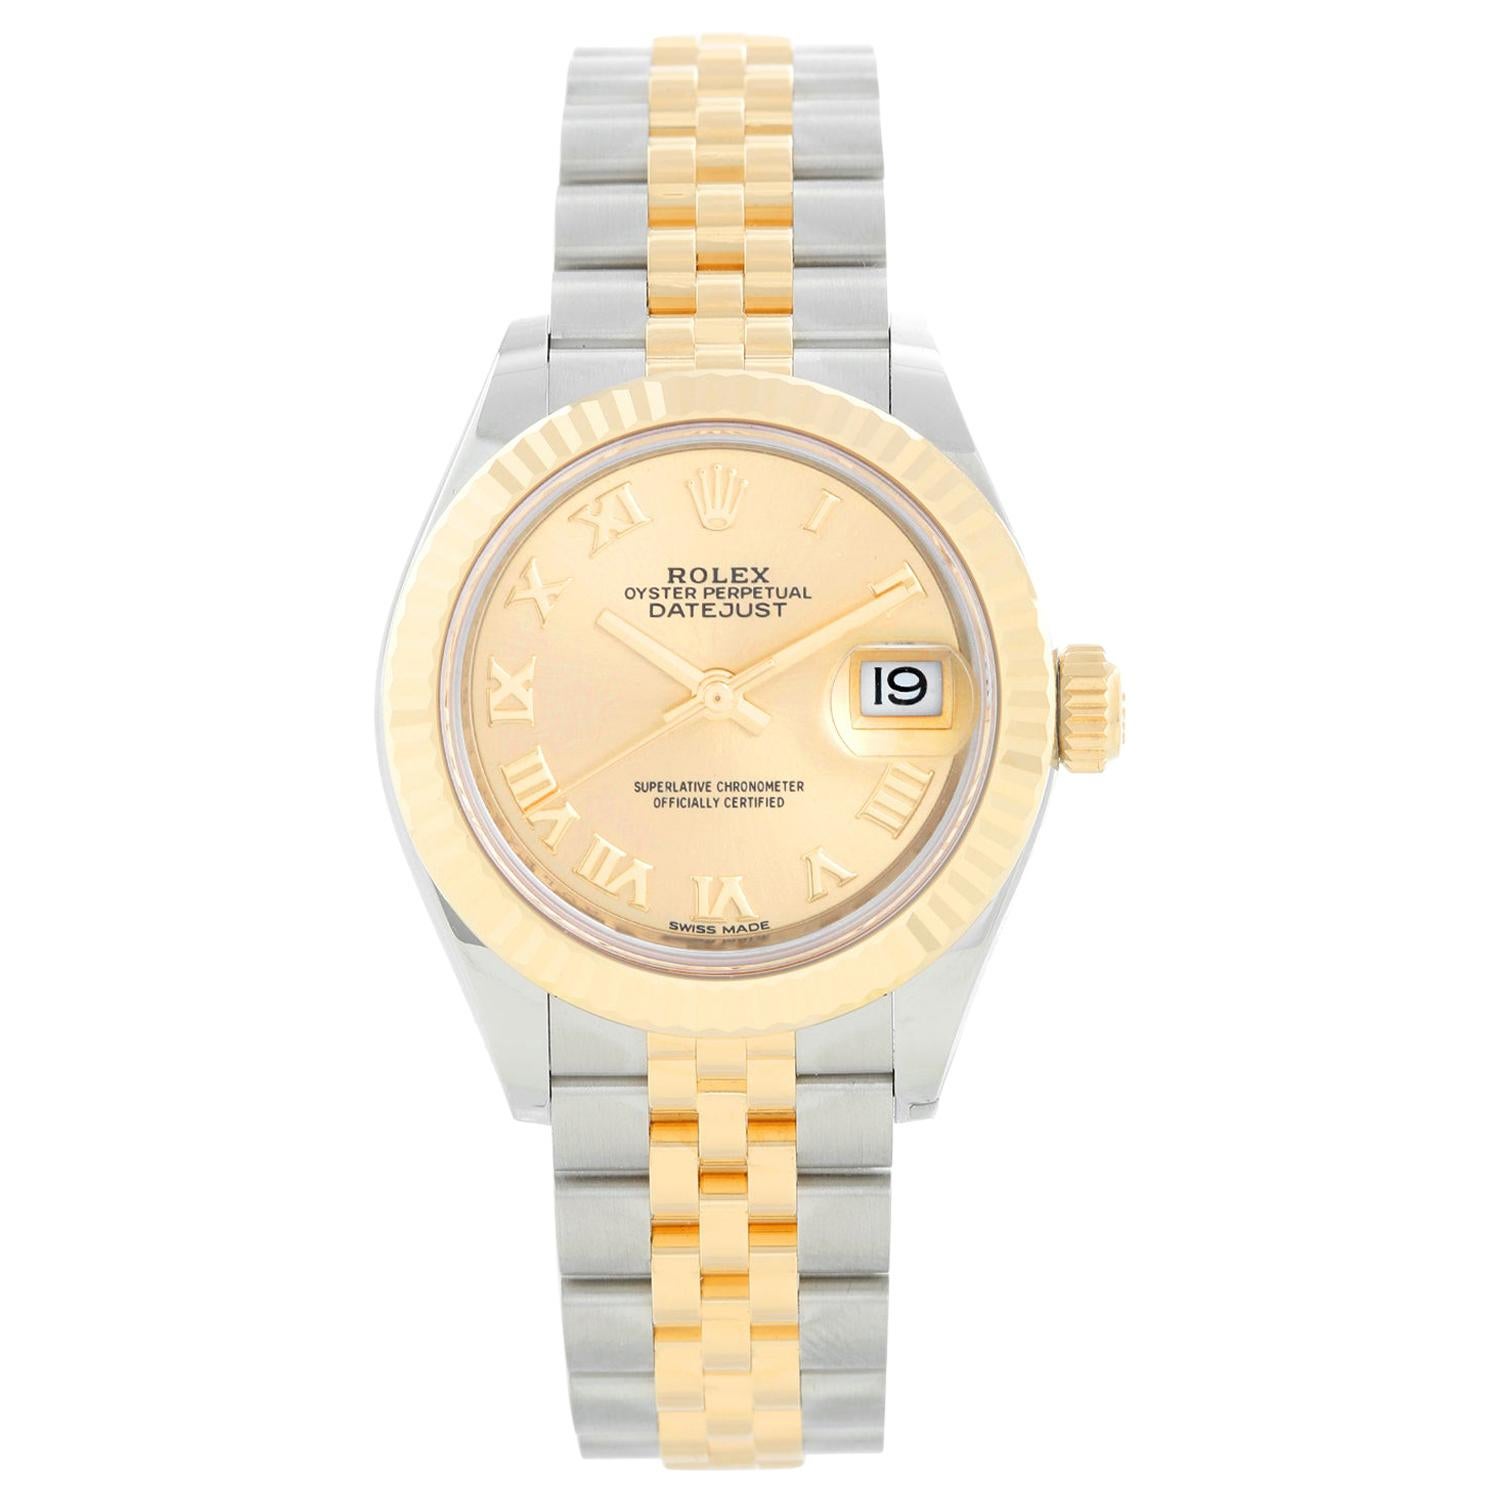 Ladies Rolex Datejust 18K Yellow Gold and Stainless Steel 279173